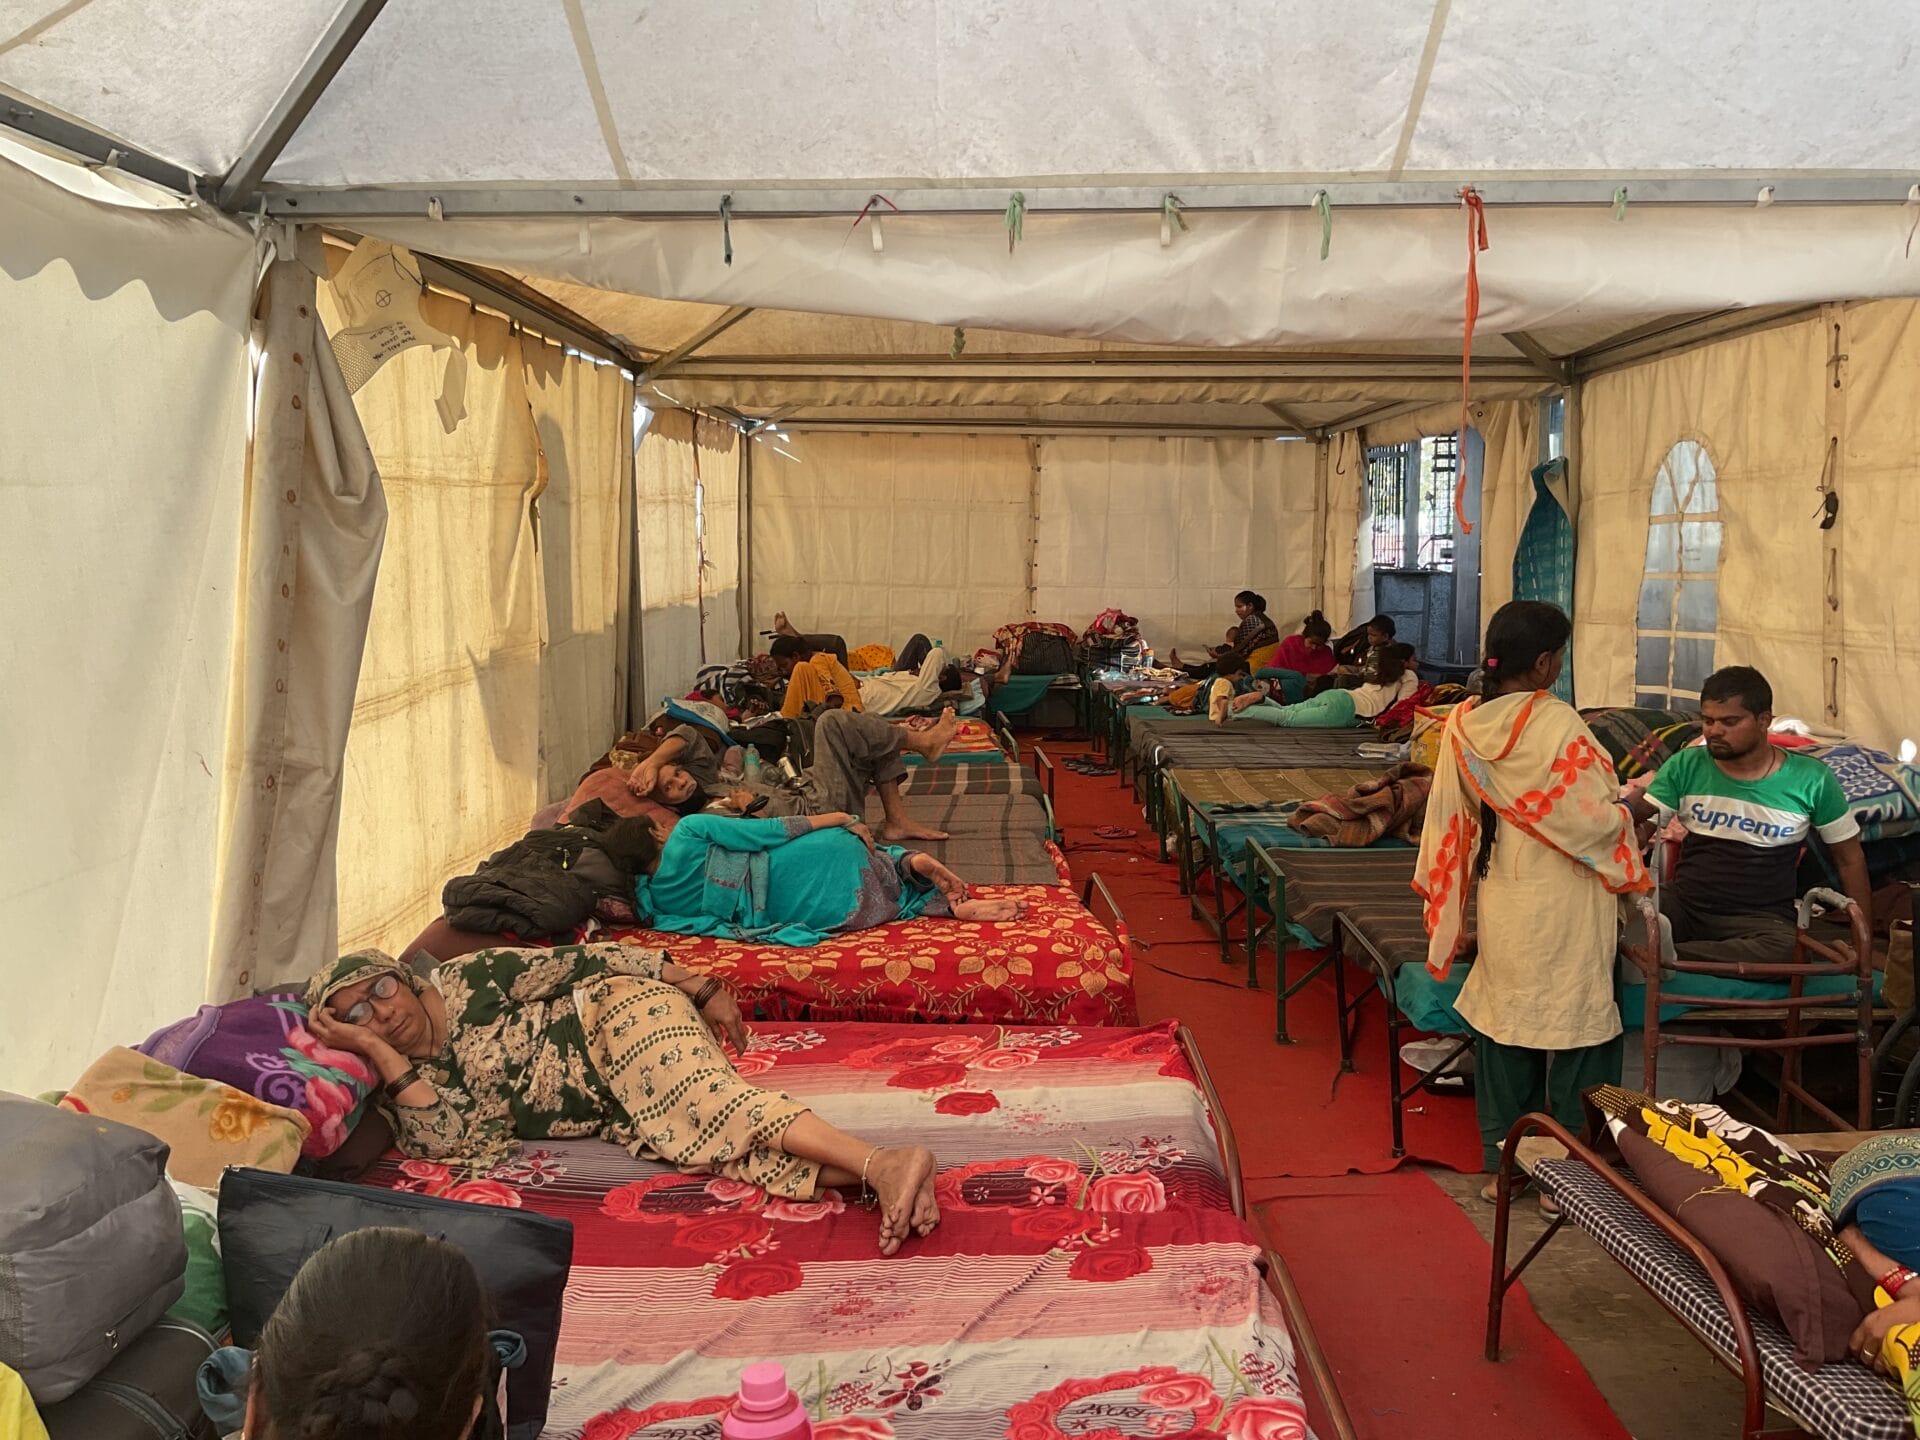 Beds and people inside the shelter near AIIMS Metro station